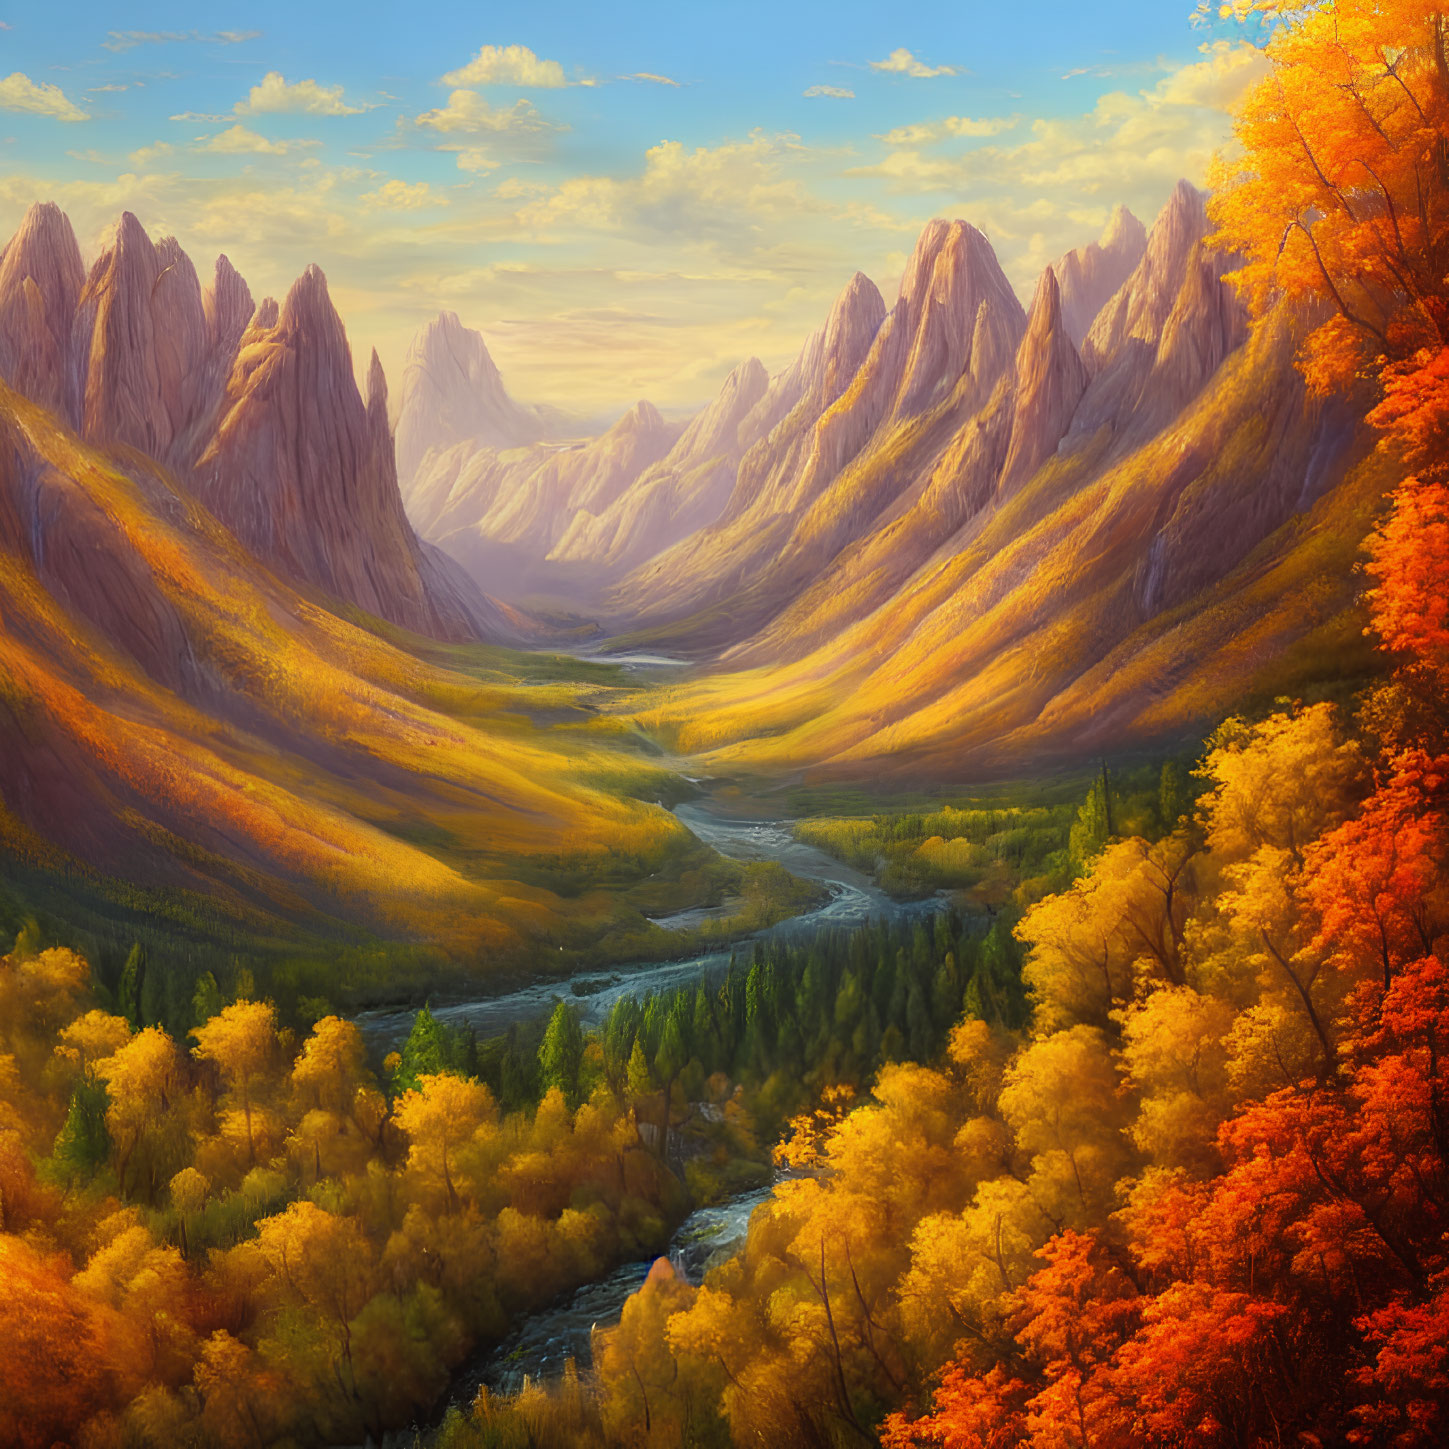 Scenic autumn landscape with river, mountains, and colorful trees